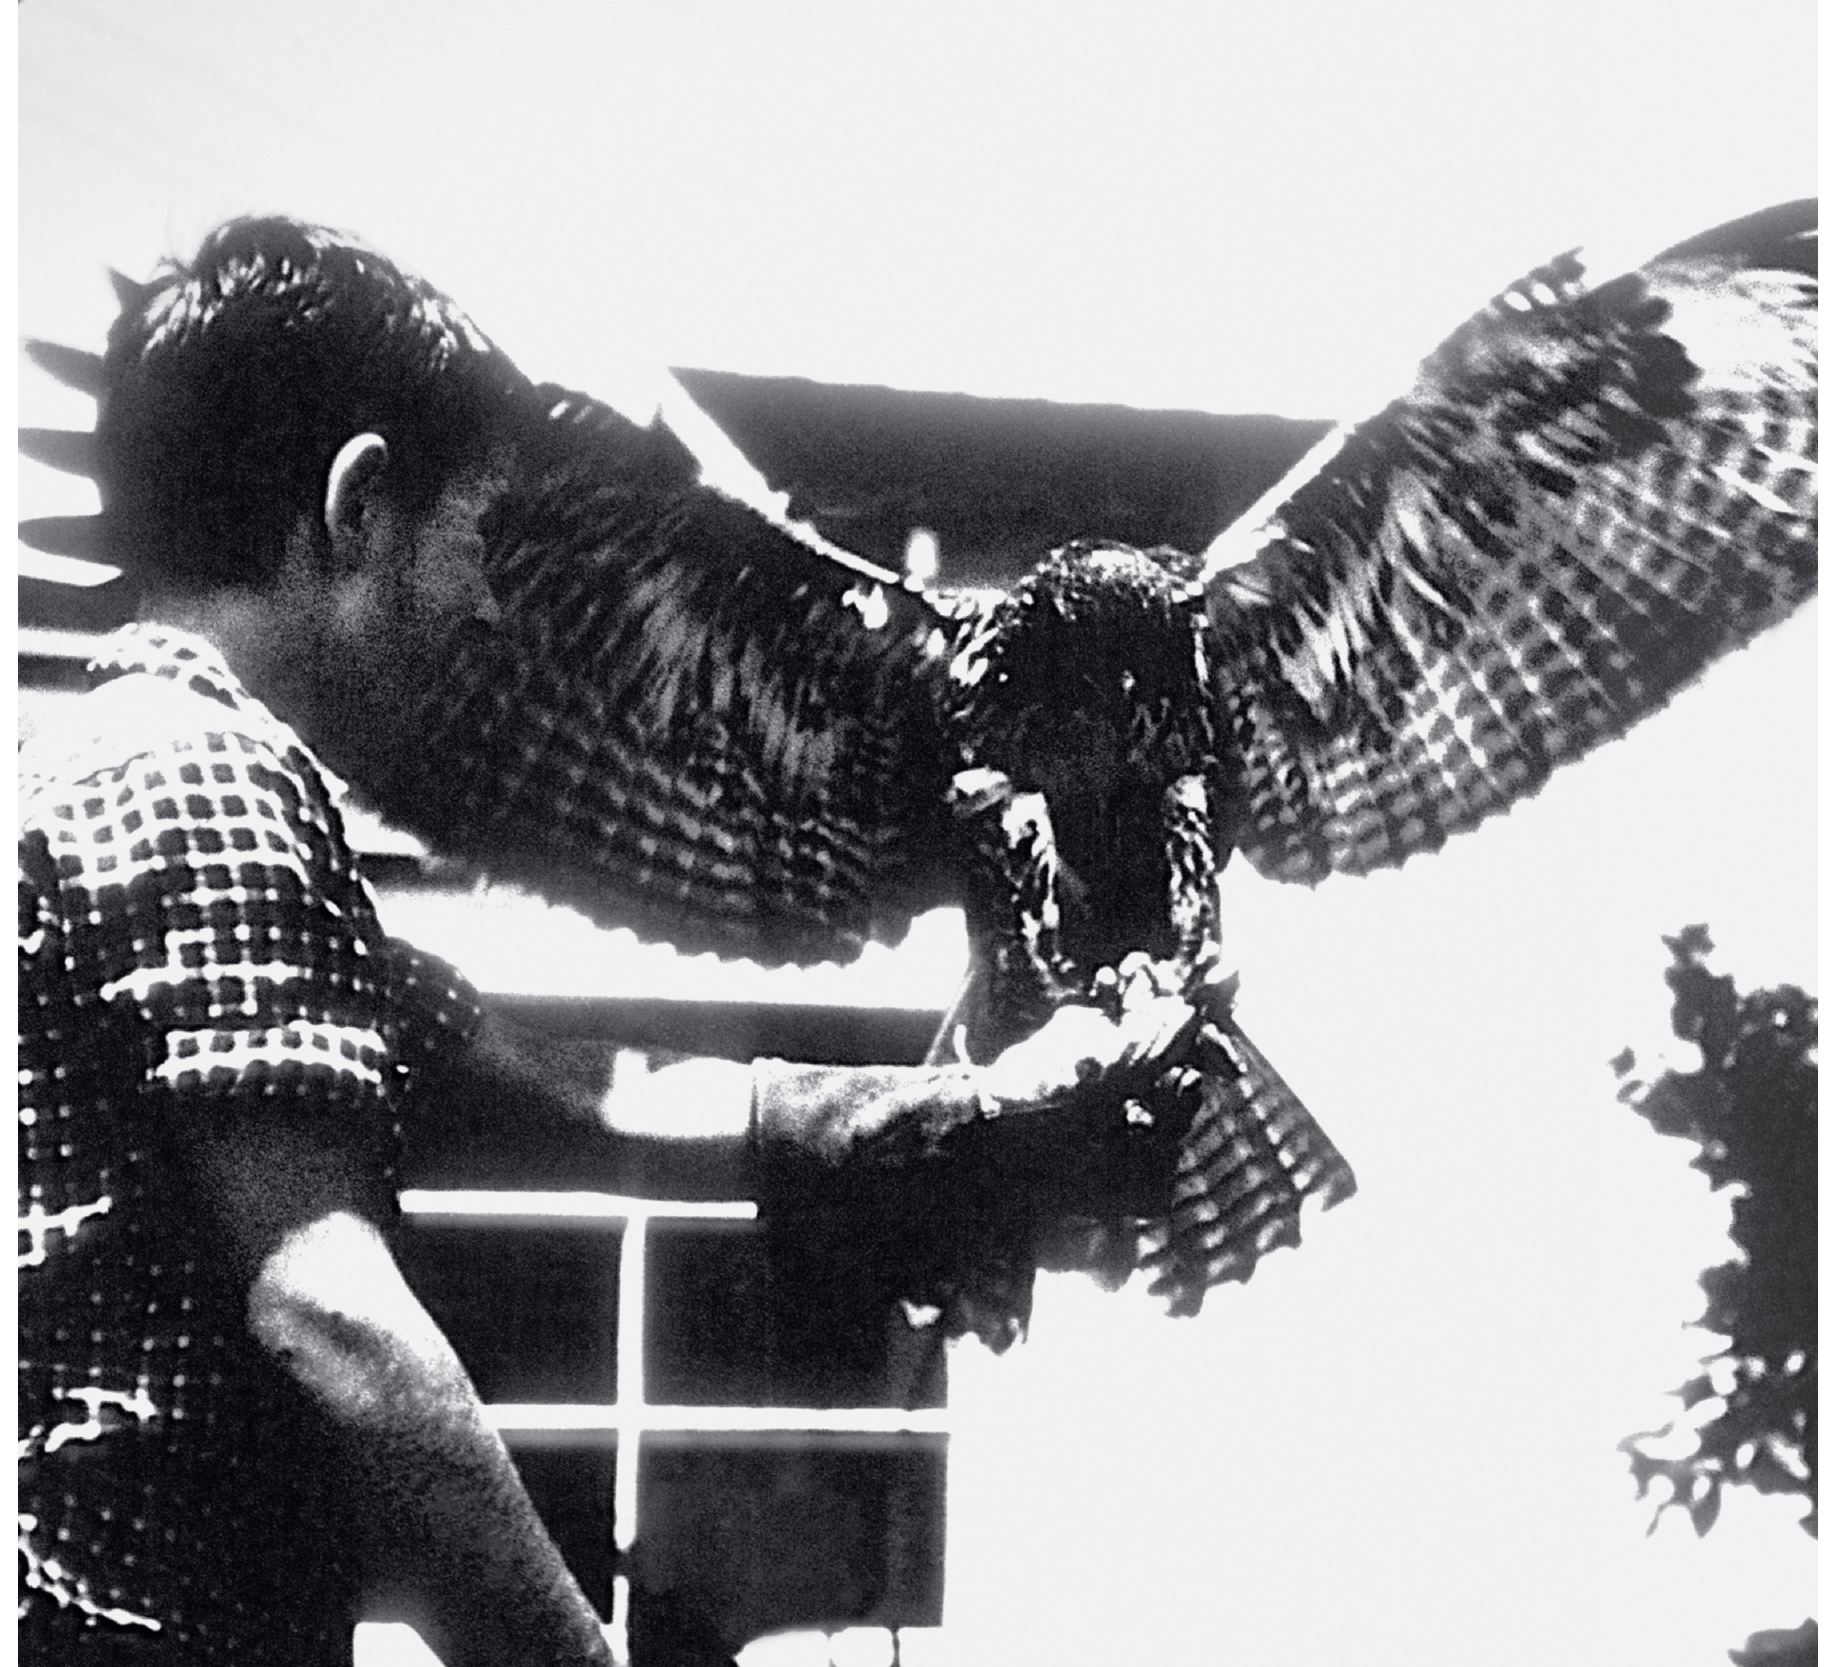 Fifteen-year-old Yvon with an immature red-tailed hawk Burbank California - photo 6